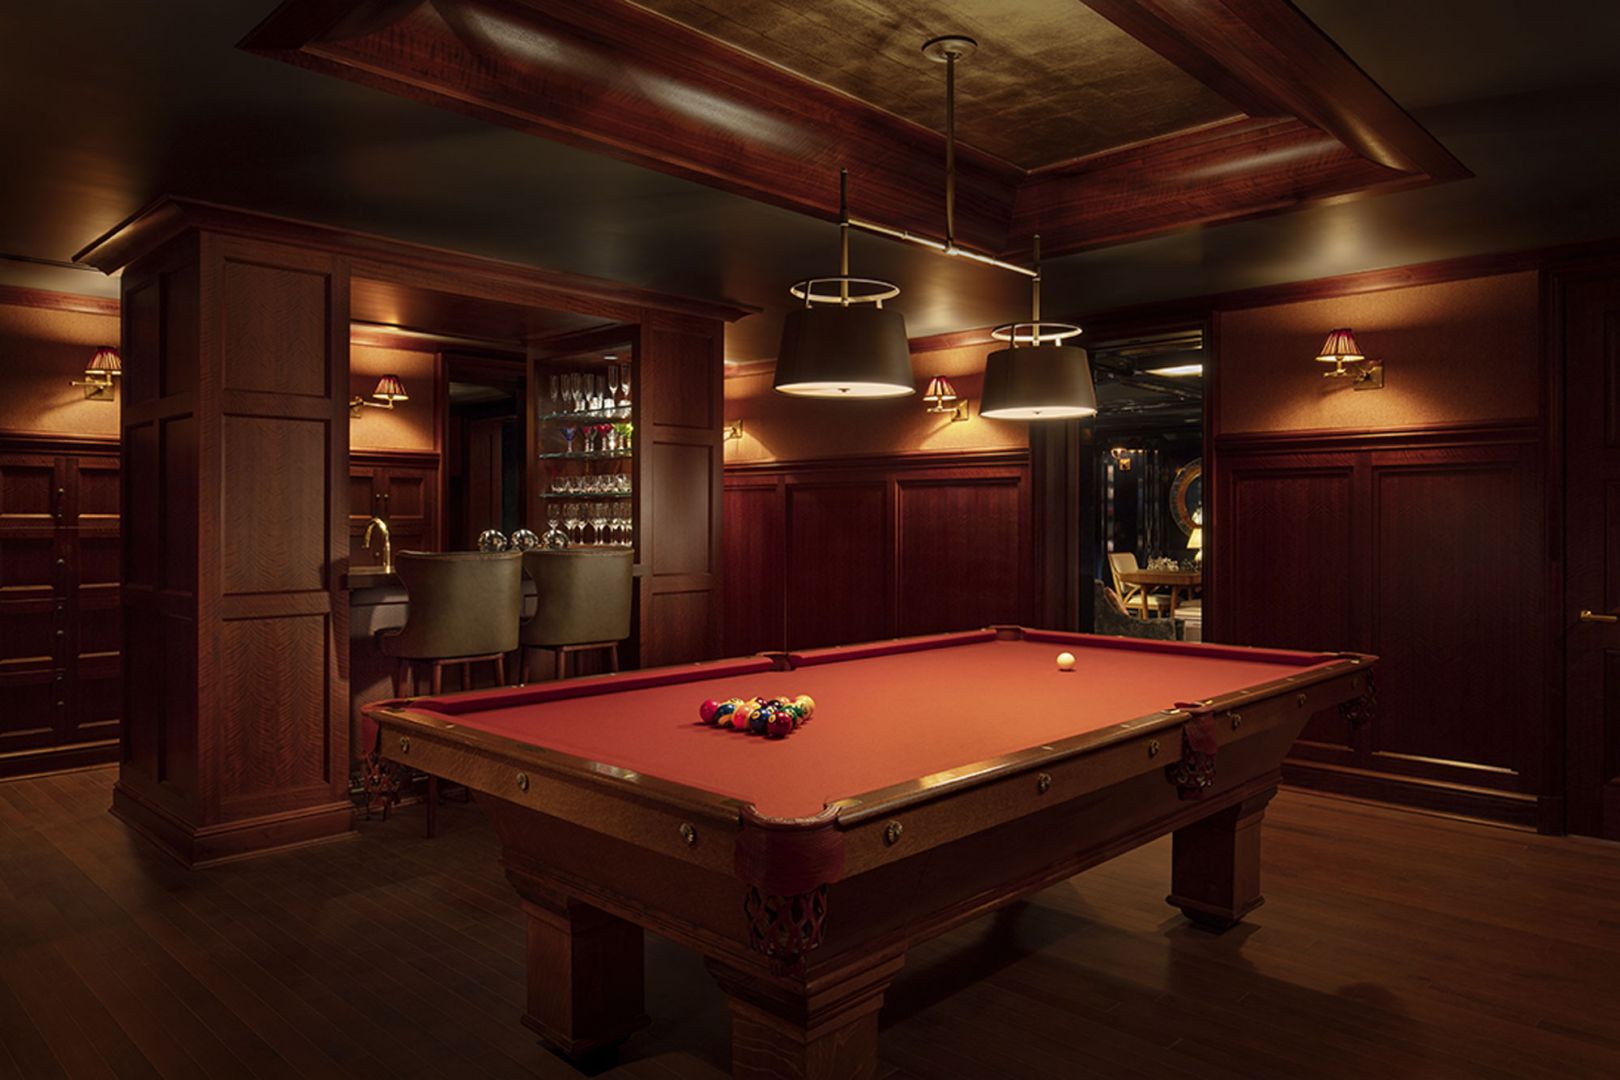 Billiards Room at 20 East End Ave